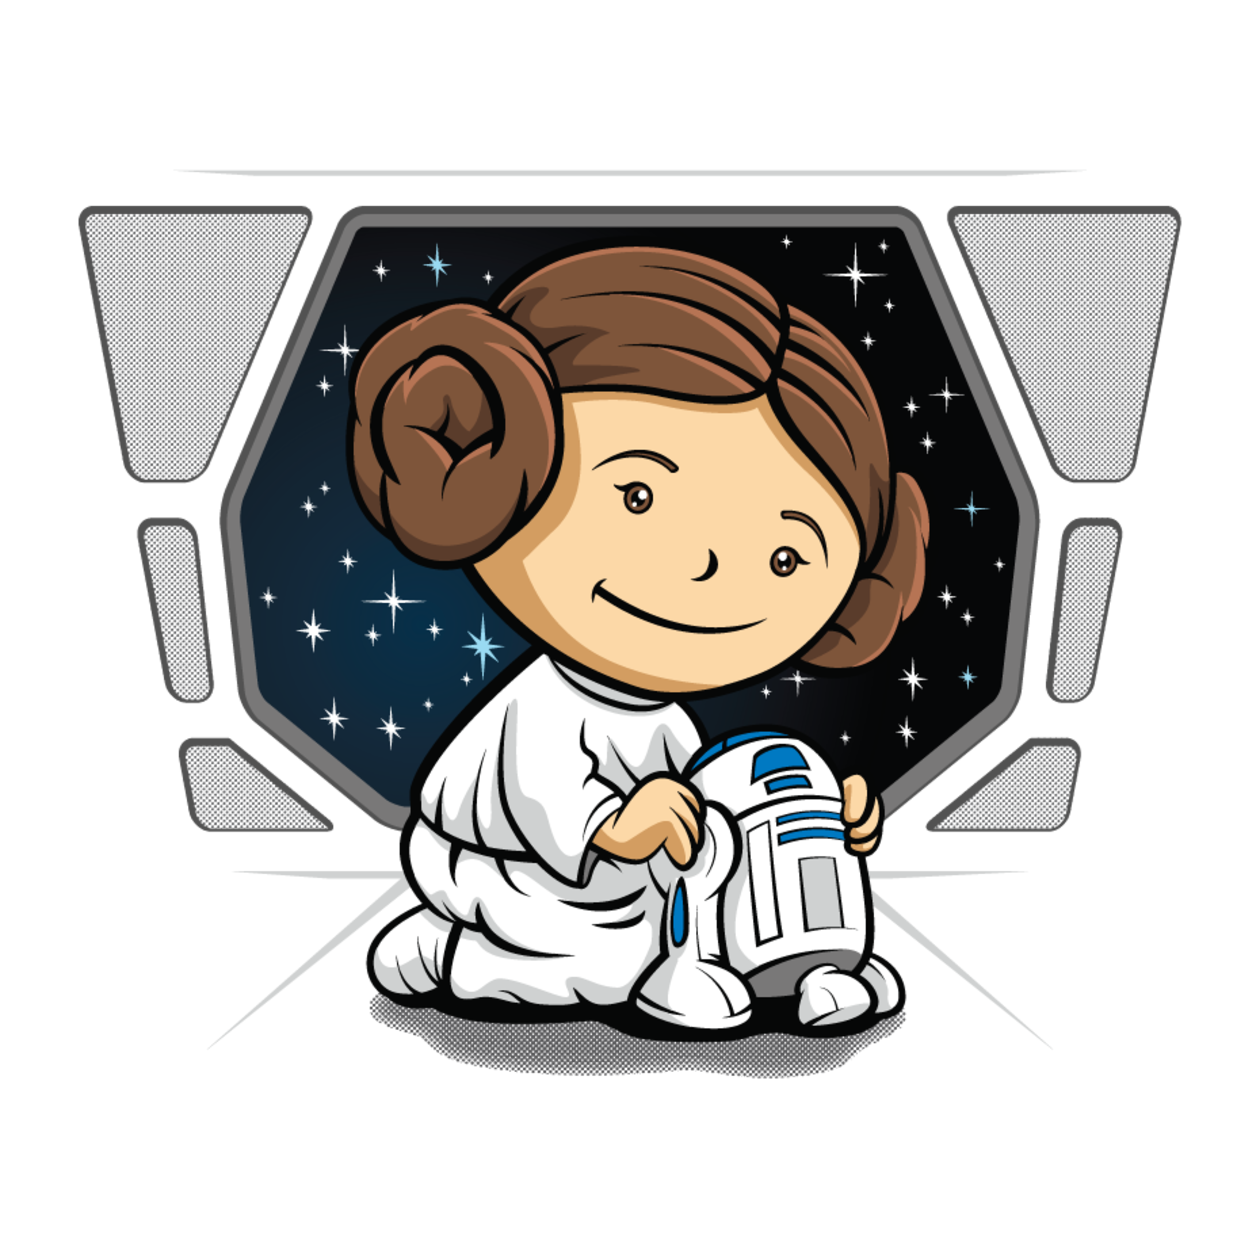 Download Star Wars Galaxys Little Princess By Djkopet A Child Version Of